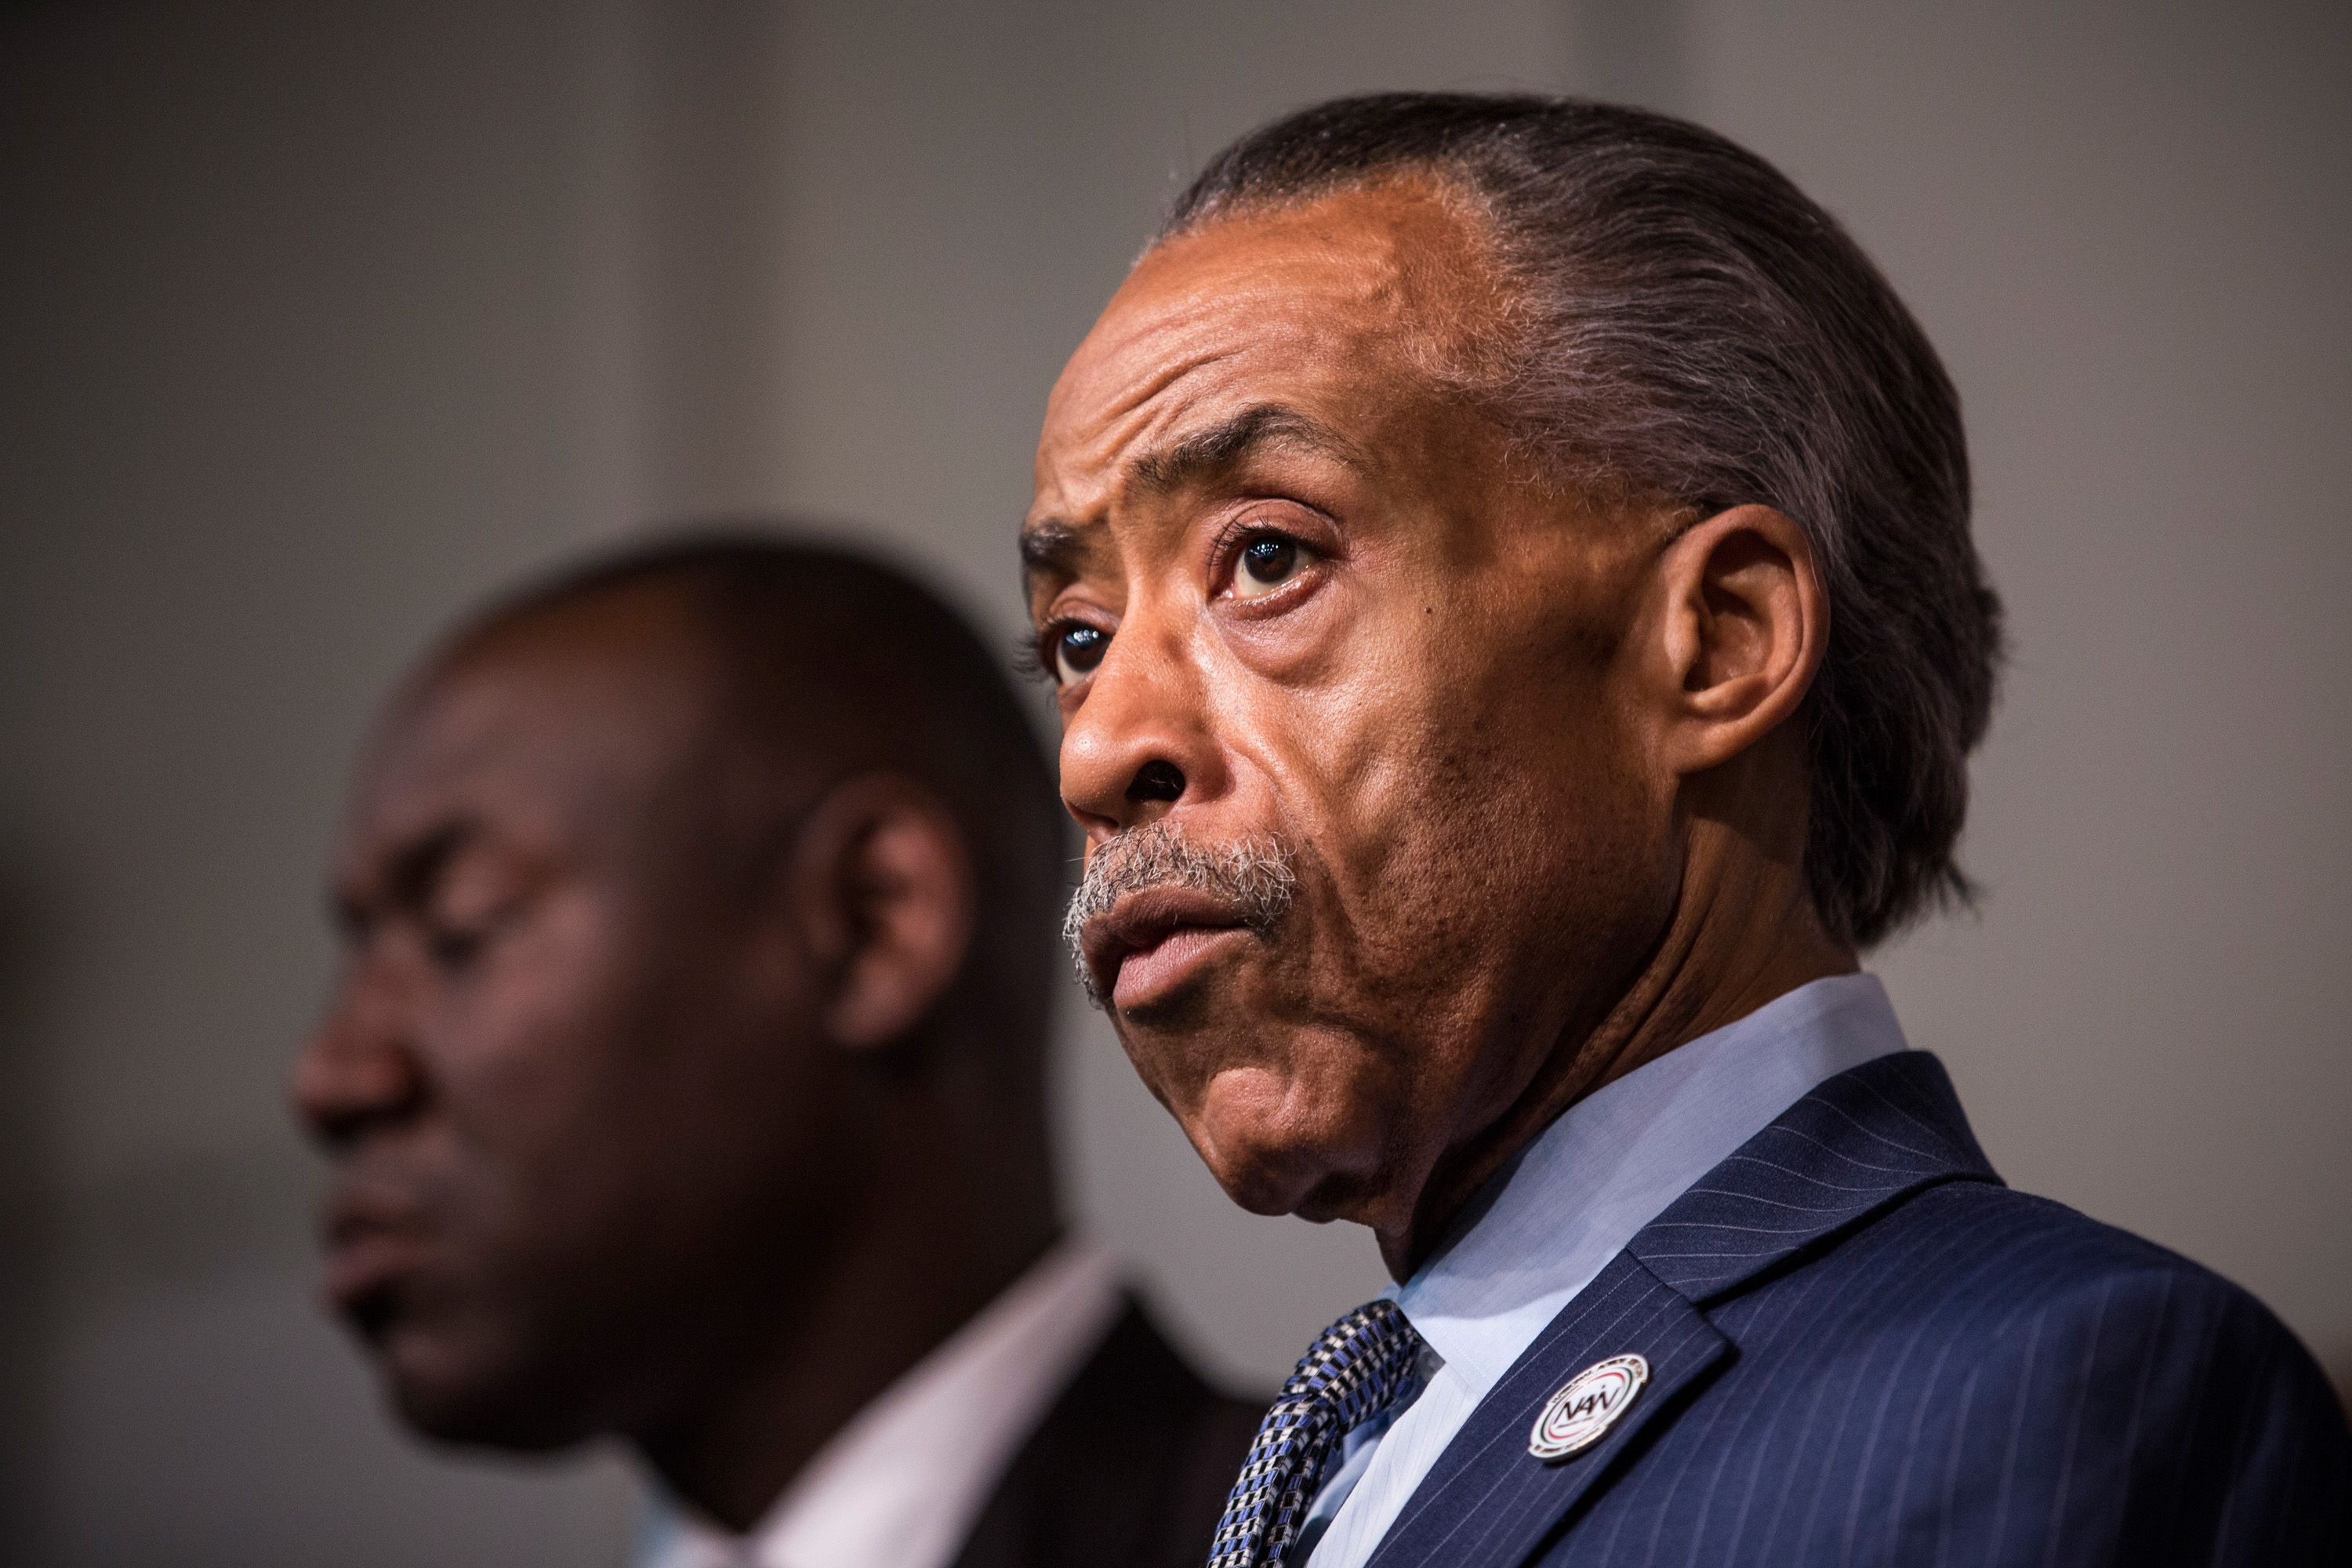 Reverand Al Sharpton speaks at a press conference on the eve of Thanksgiving to pray and address the events of the last few days regarding the grand jury verdict of police officer Darren Wilson on Nov. 26, 2014 in New York. (Andrew Burton—Getty Images)